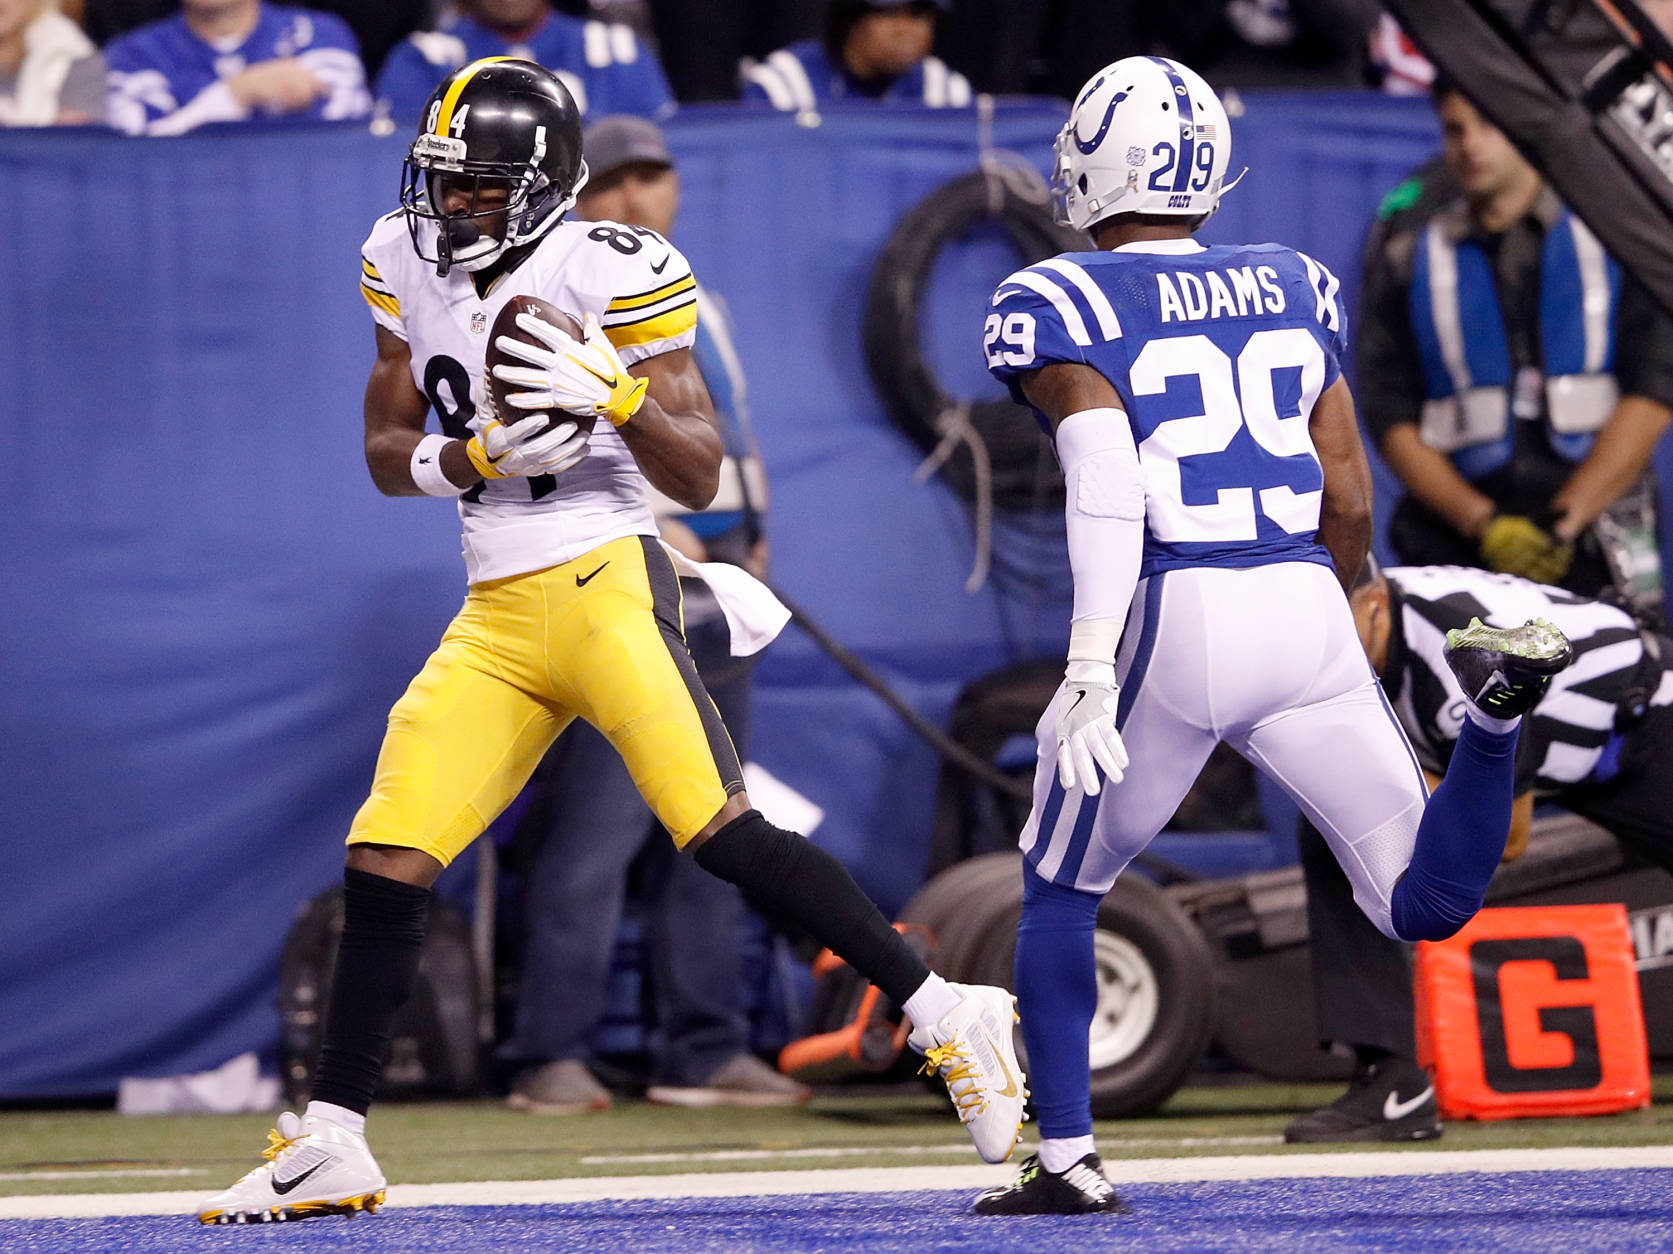 INDIANAPOLIS, IN - NOVEMBER 24: Antonio Brown #84 of the Pittsburgh Steelers catches his third touchdown of the night during in the fourth quarter of the game against the Indianapolis Colts at Lucas Oil Stadium on November 24, 2016 in Indianapolis, Indiana.  (Photo by Joe Robbins/Getty Images)